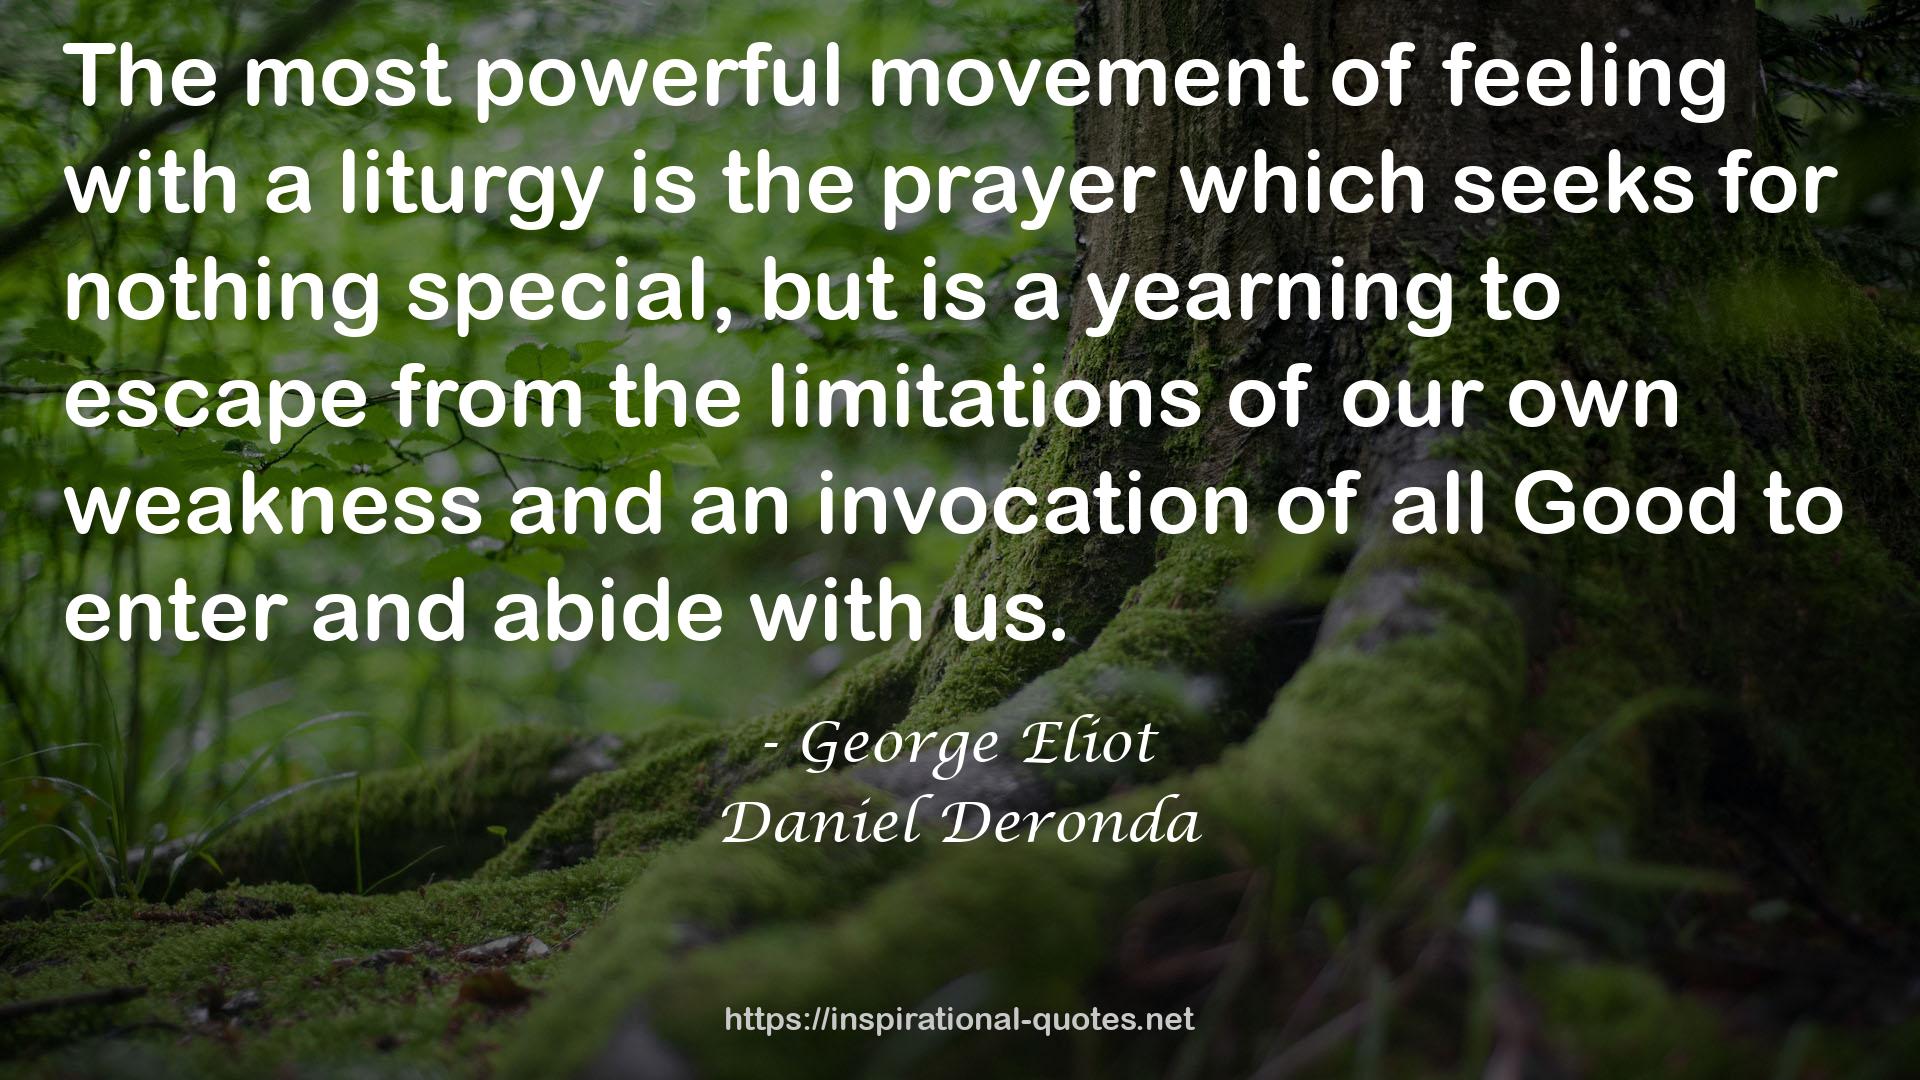 an invocation  QUOTES